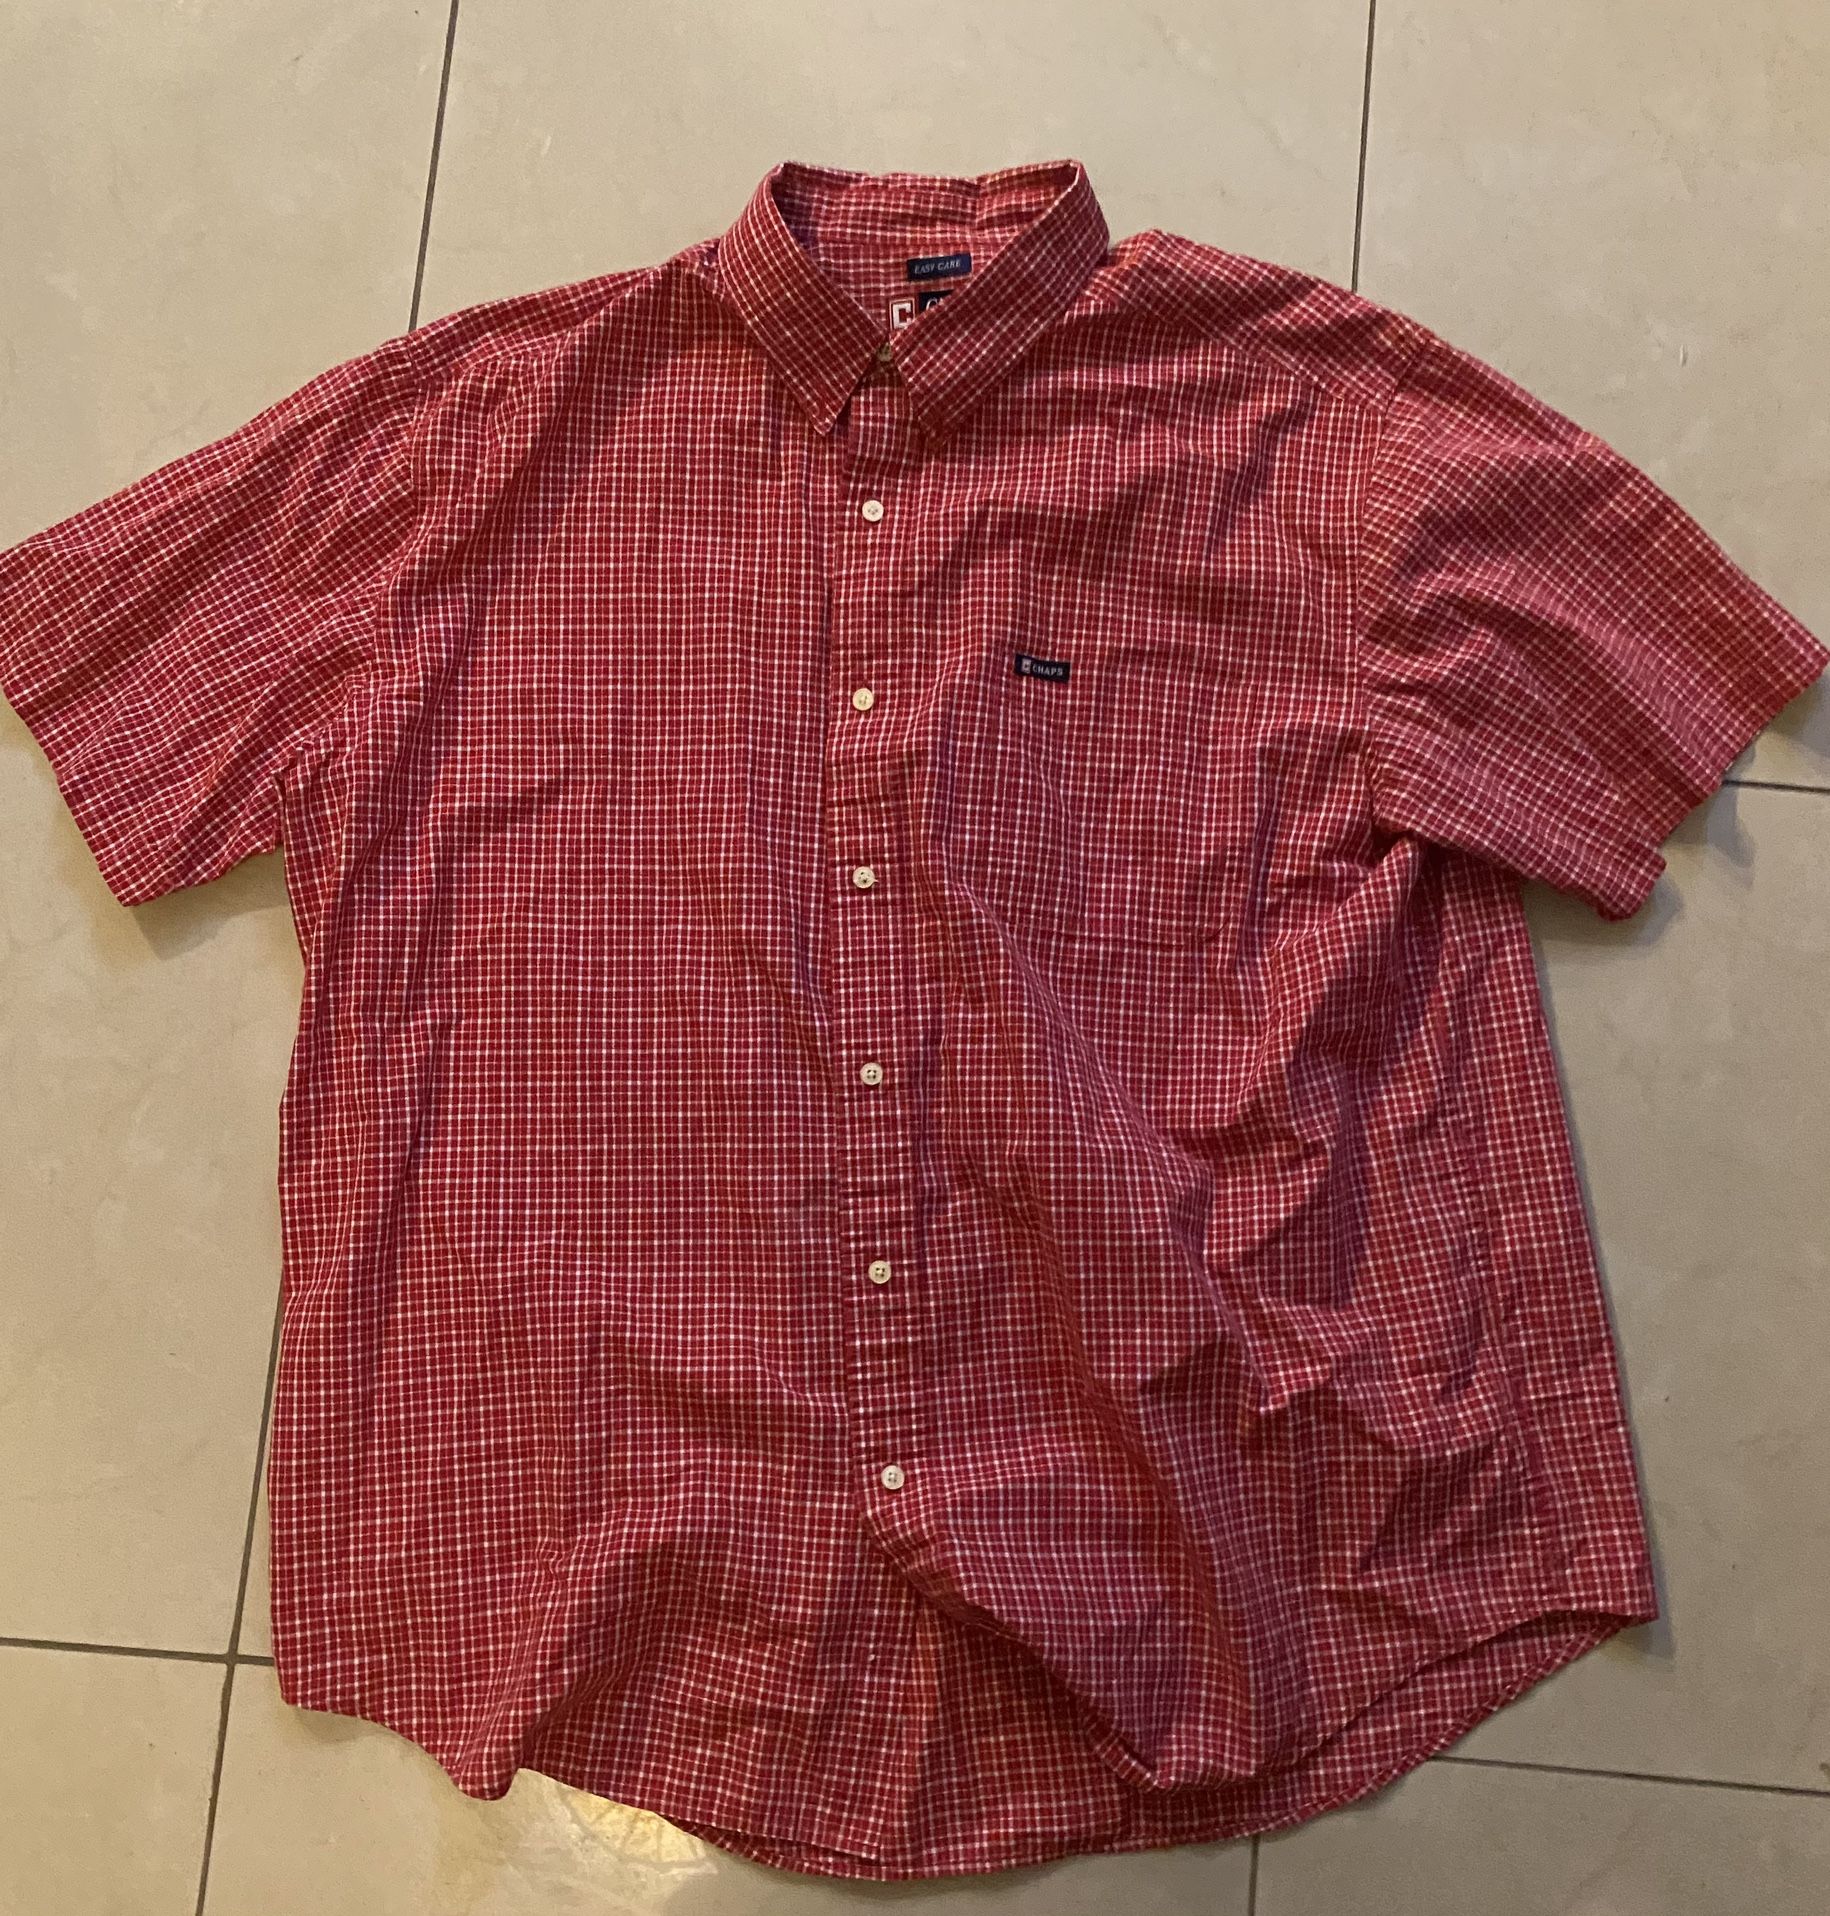 Chaps plaided button up shirt size 2XL (used)